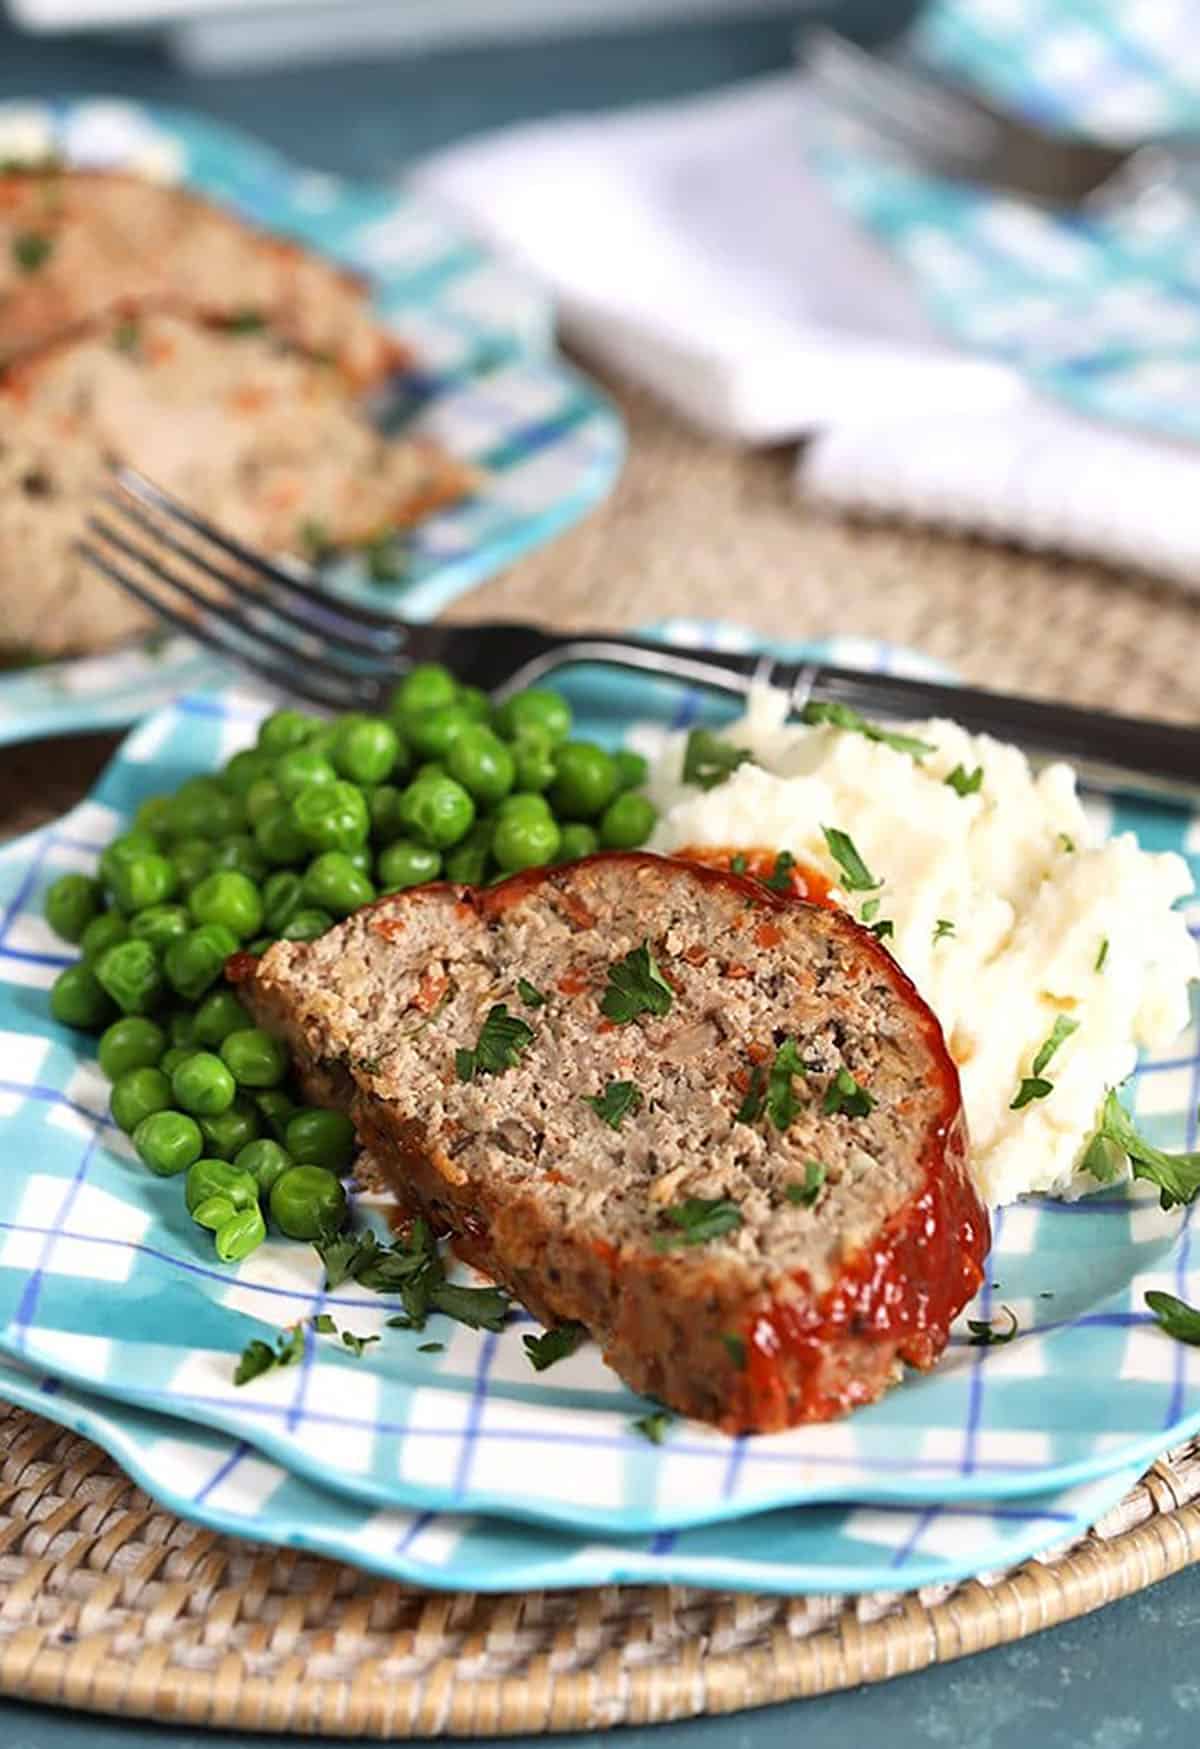 Slice of turkey meatloaf on a blue plaid plate with mashed potatoes and peas.